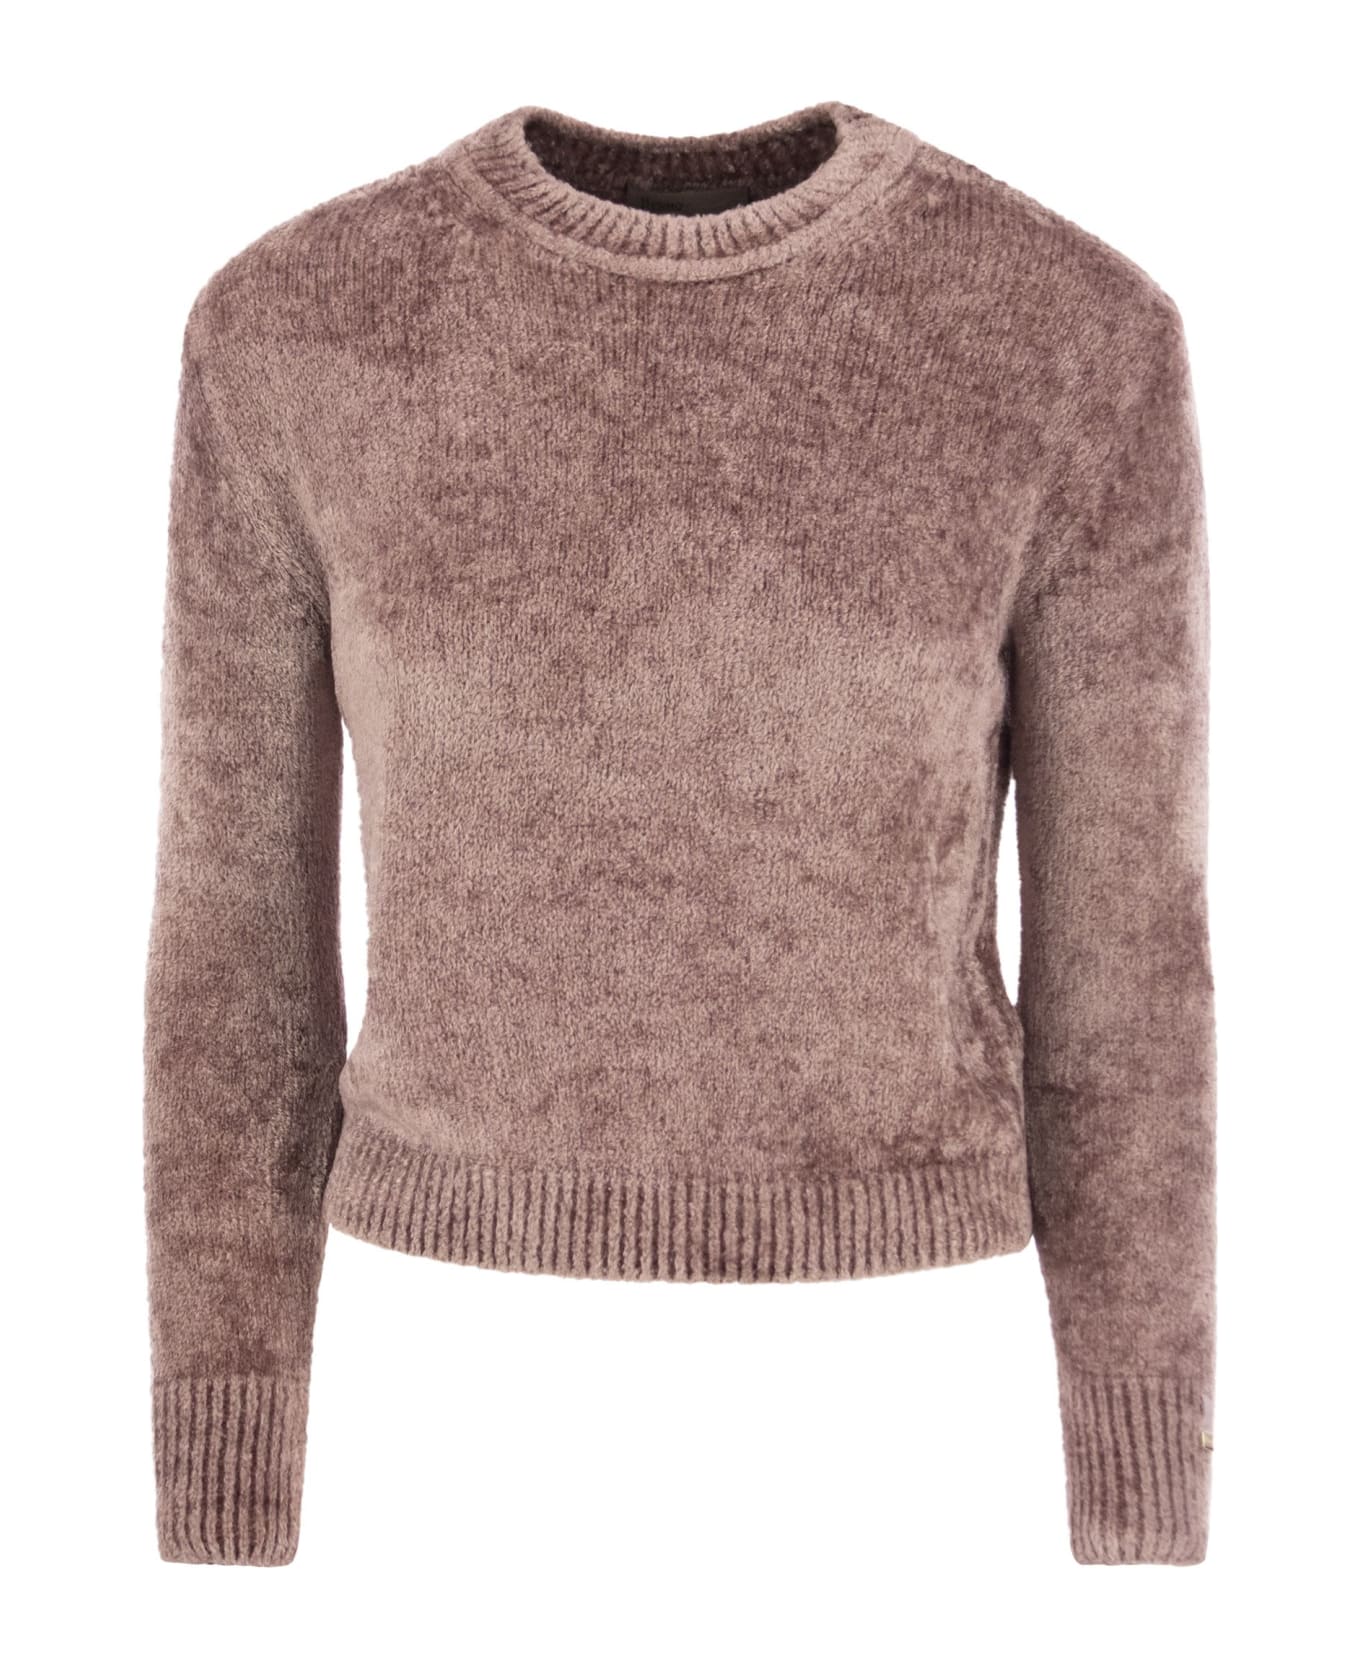 Herno Resort Pullover In Chenille Knit Sweater - Pink